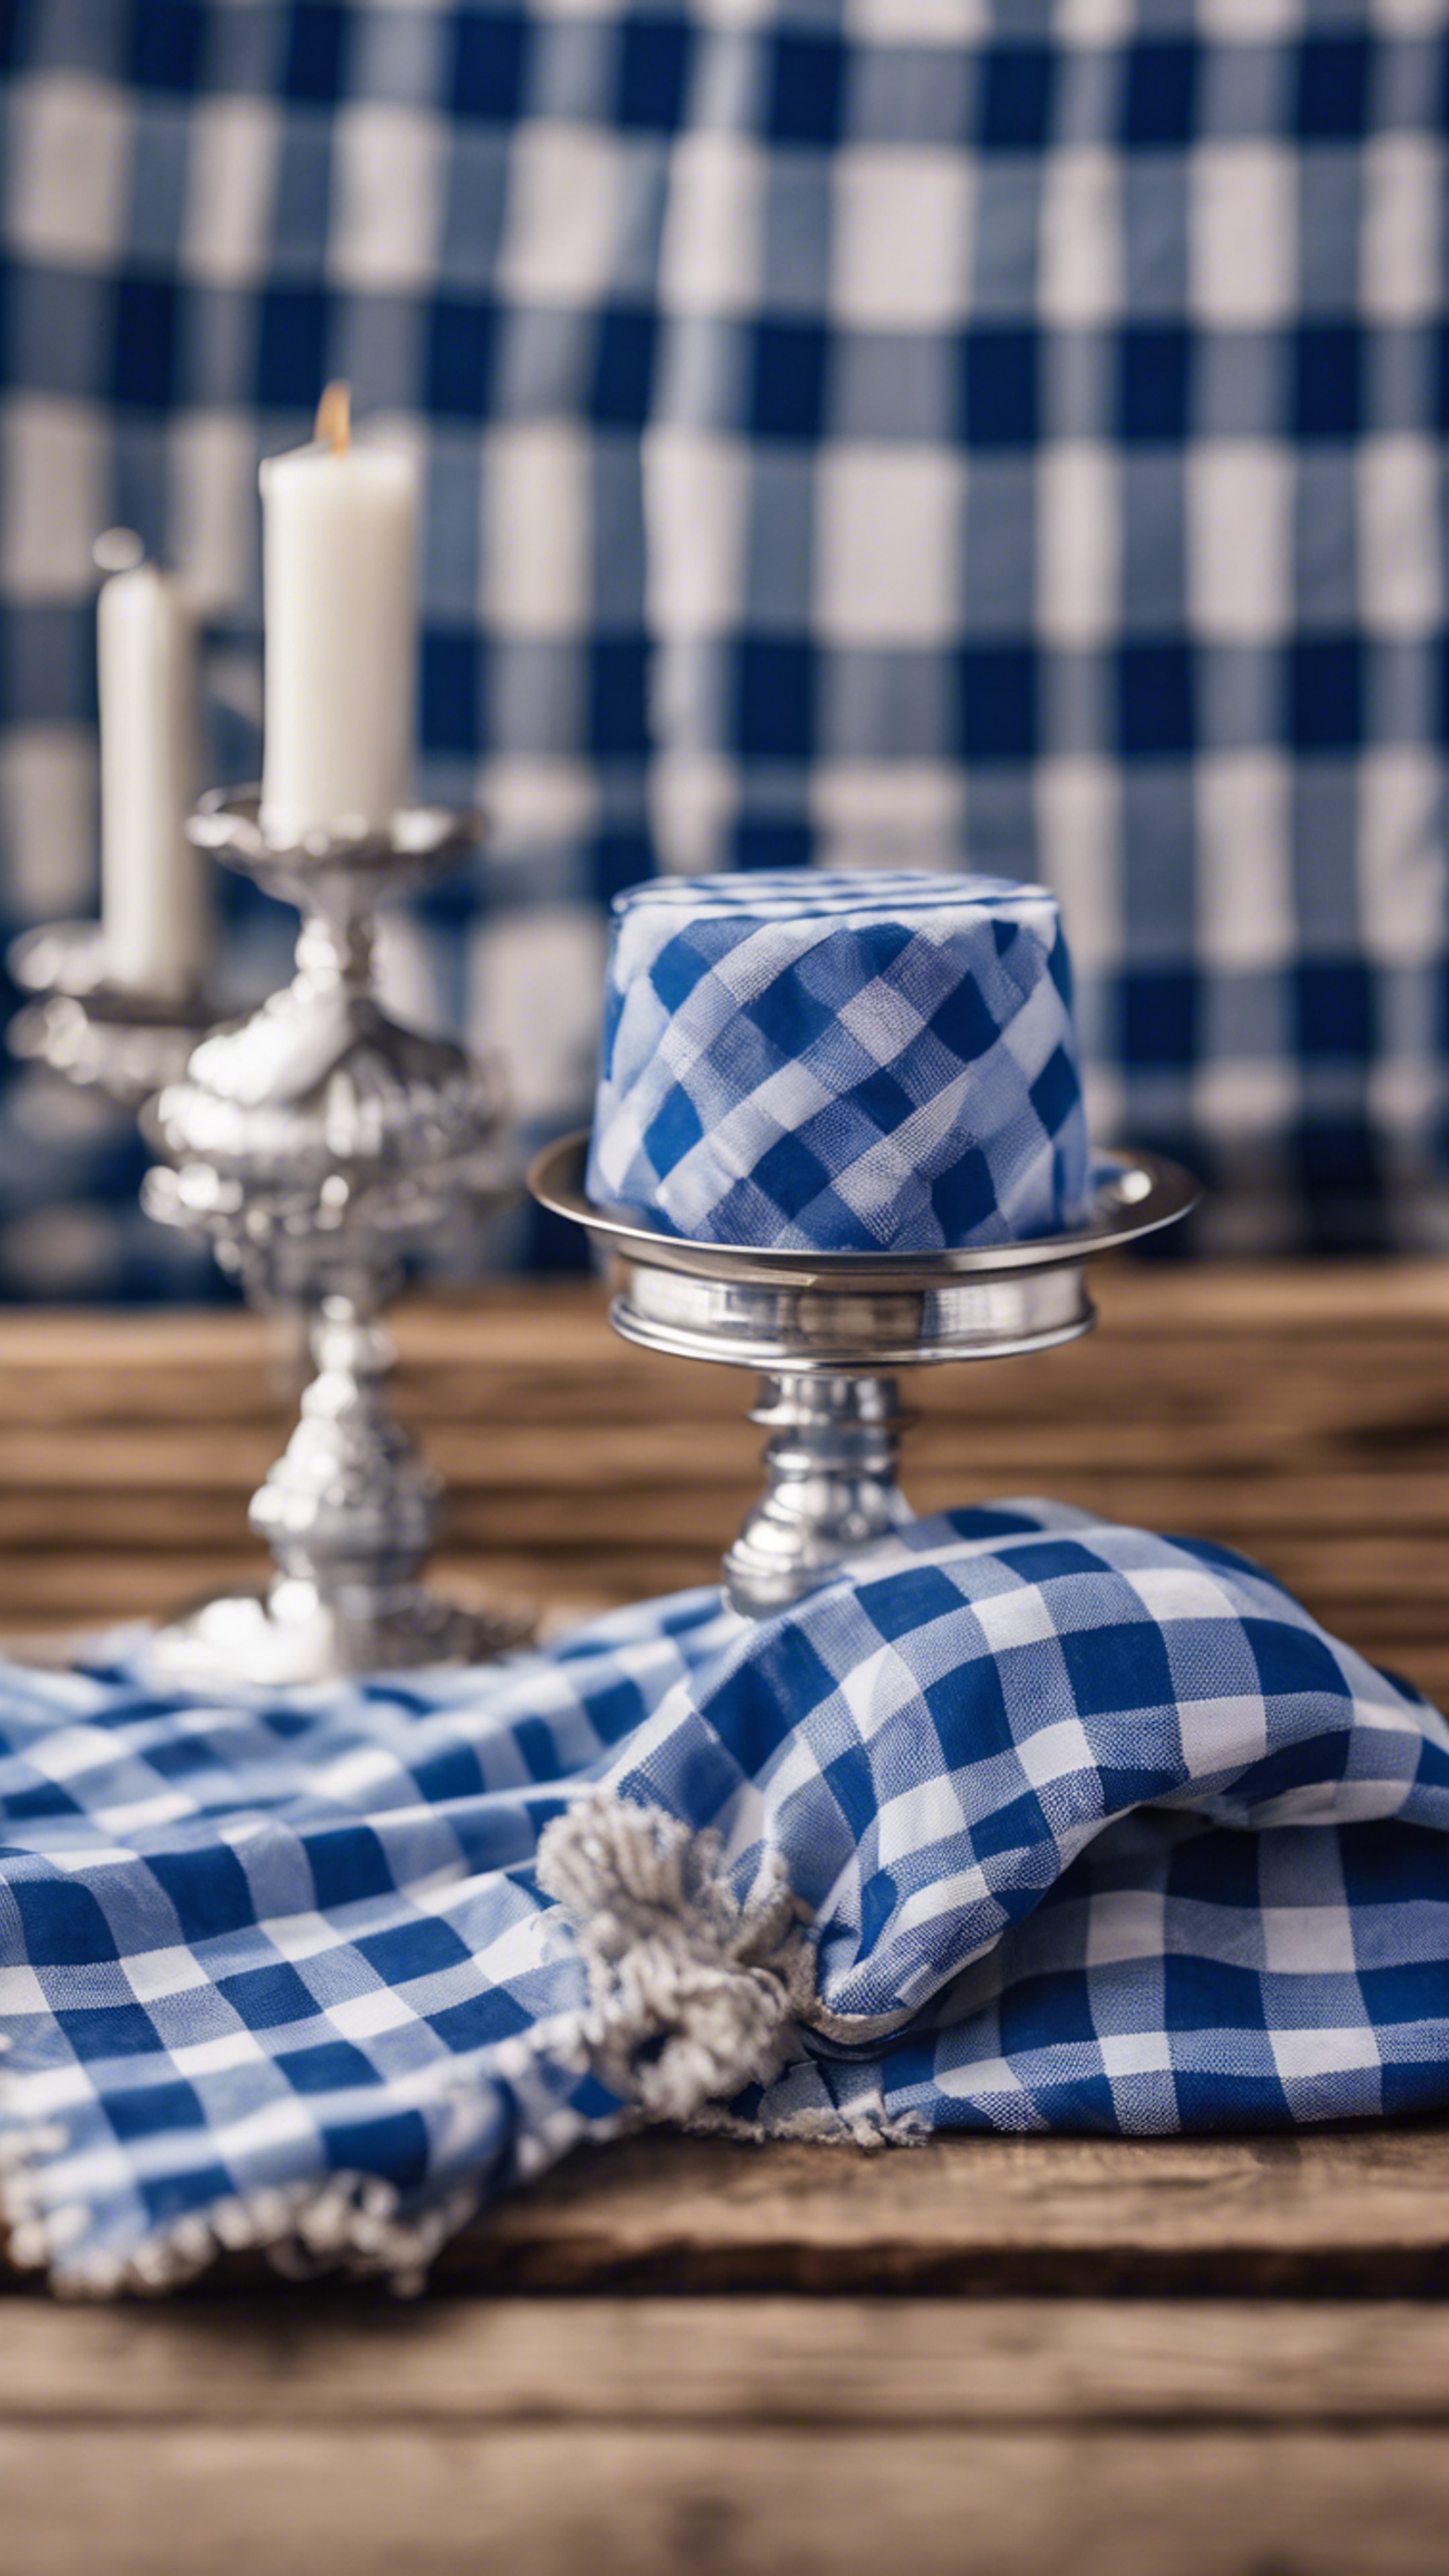 Classic blue checkered gingham fabric draped over a wooden table with a silver candelabra, evoking a preppy picnic scene.壁紙[5483729deeeb4e2a9f91]